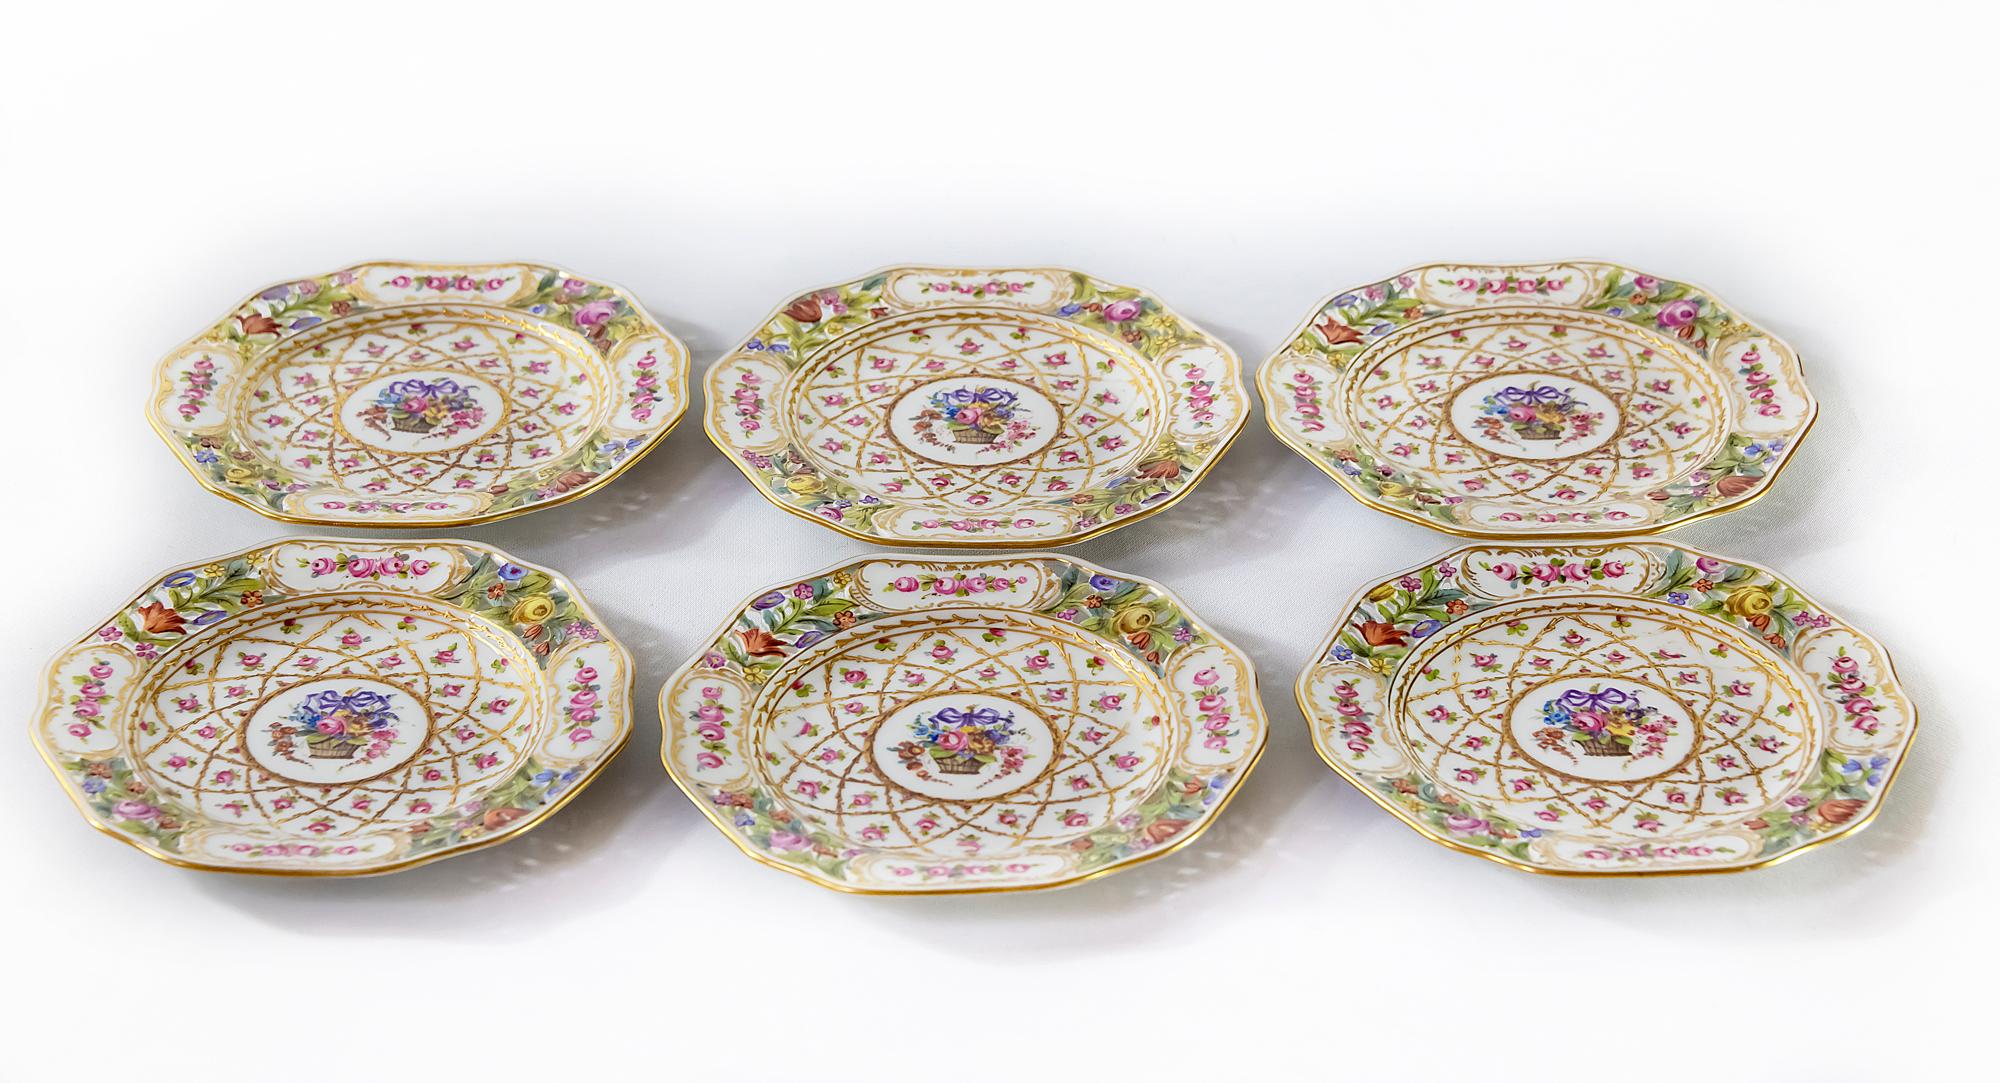 German Dresden porcelain plates.
Plates are hand painted with floral motives.
The edge of plate is perforated.
Dimentions: 16.5 x 1.8 (H) cm.
  